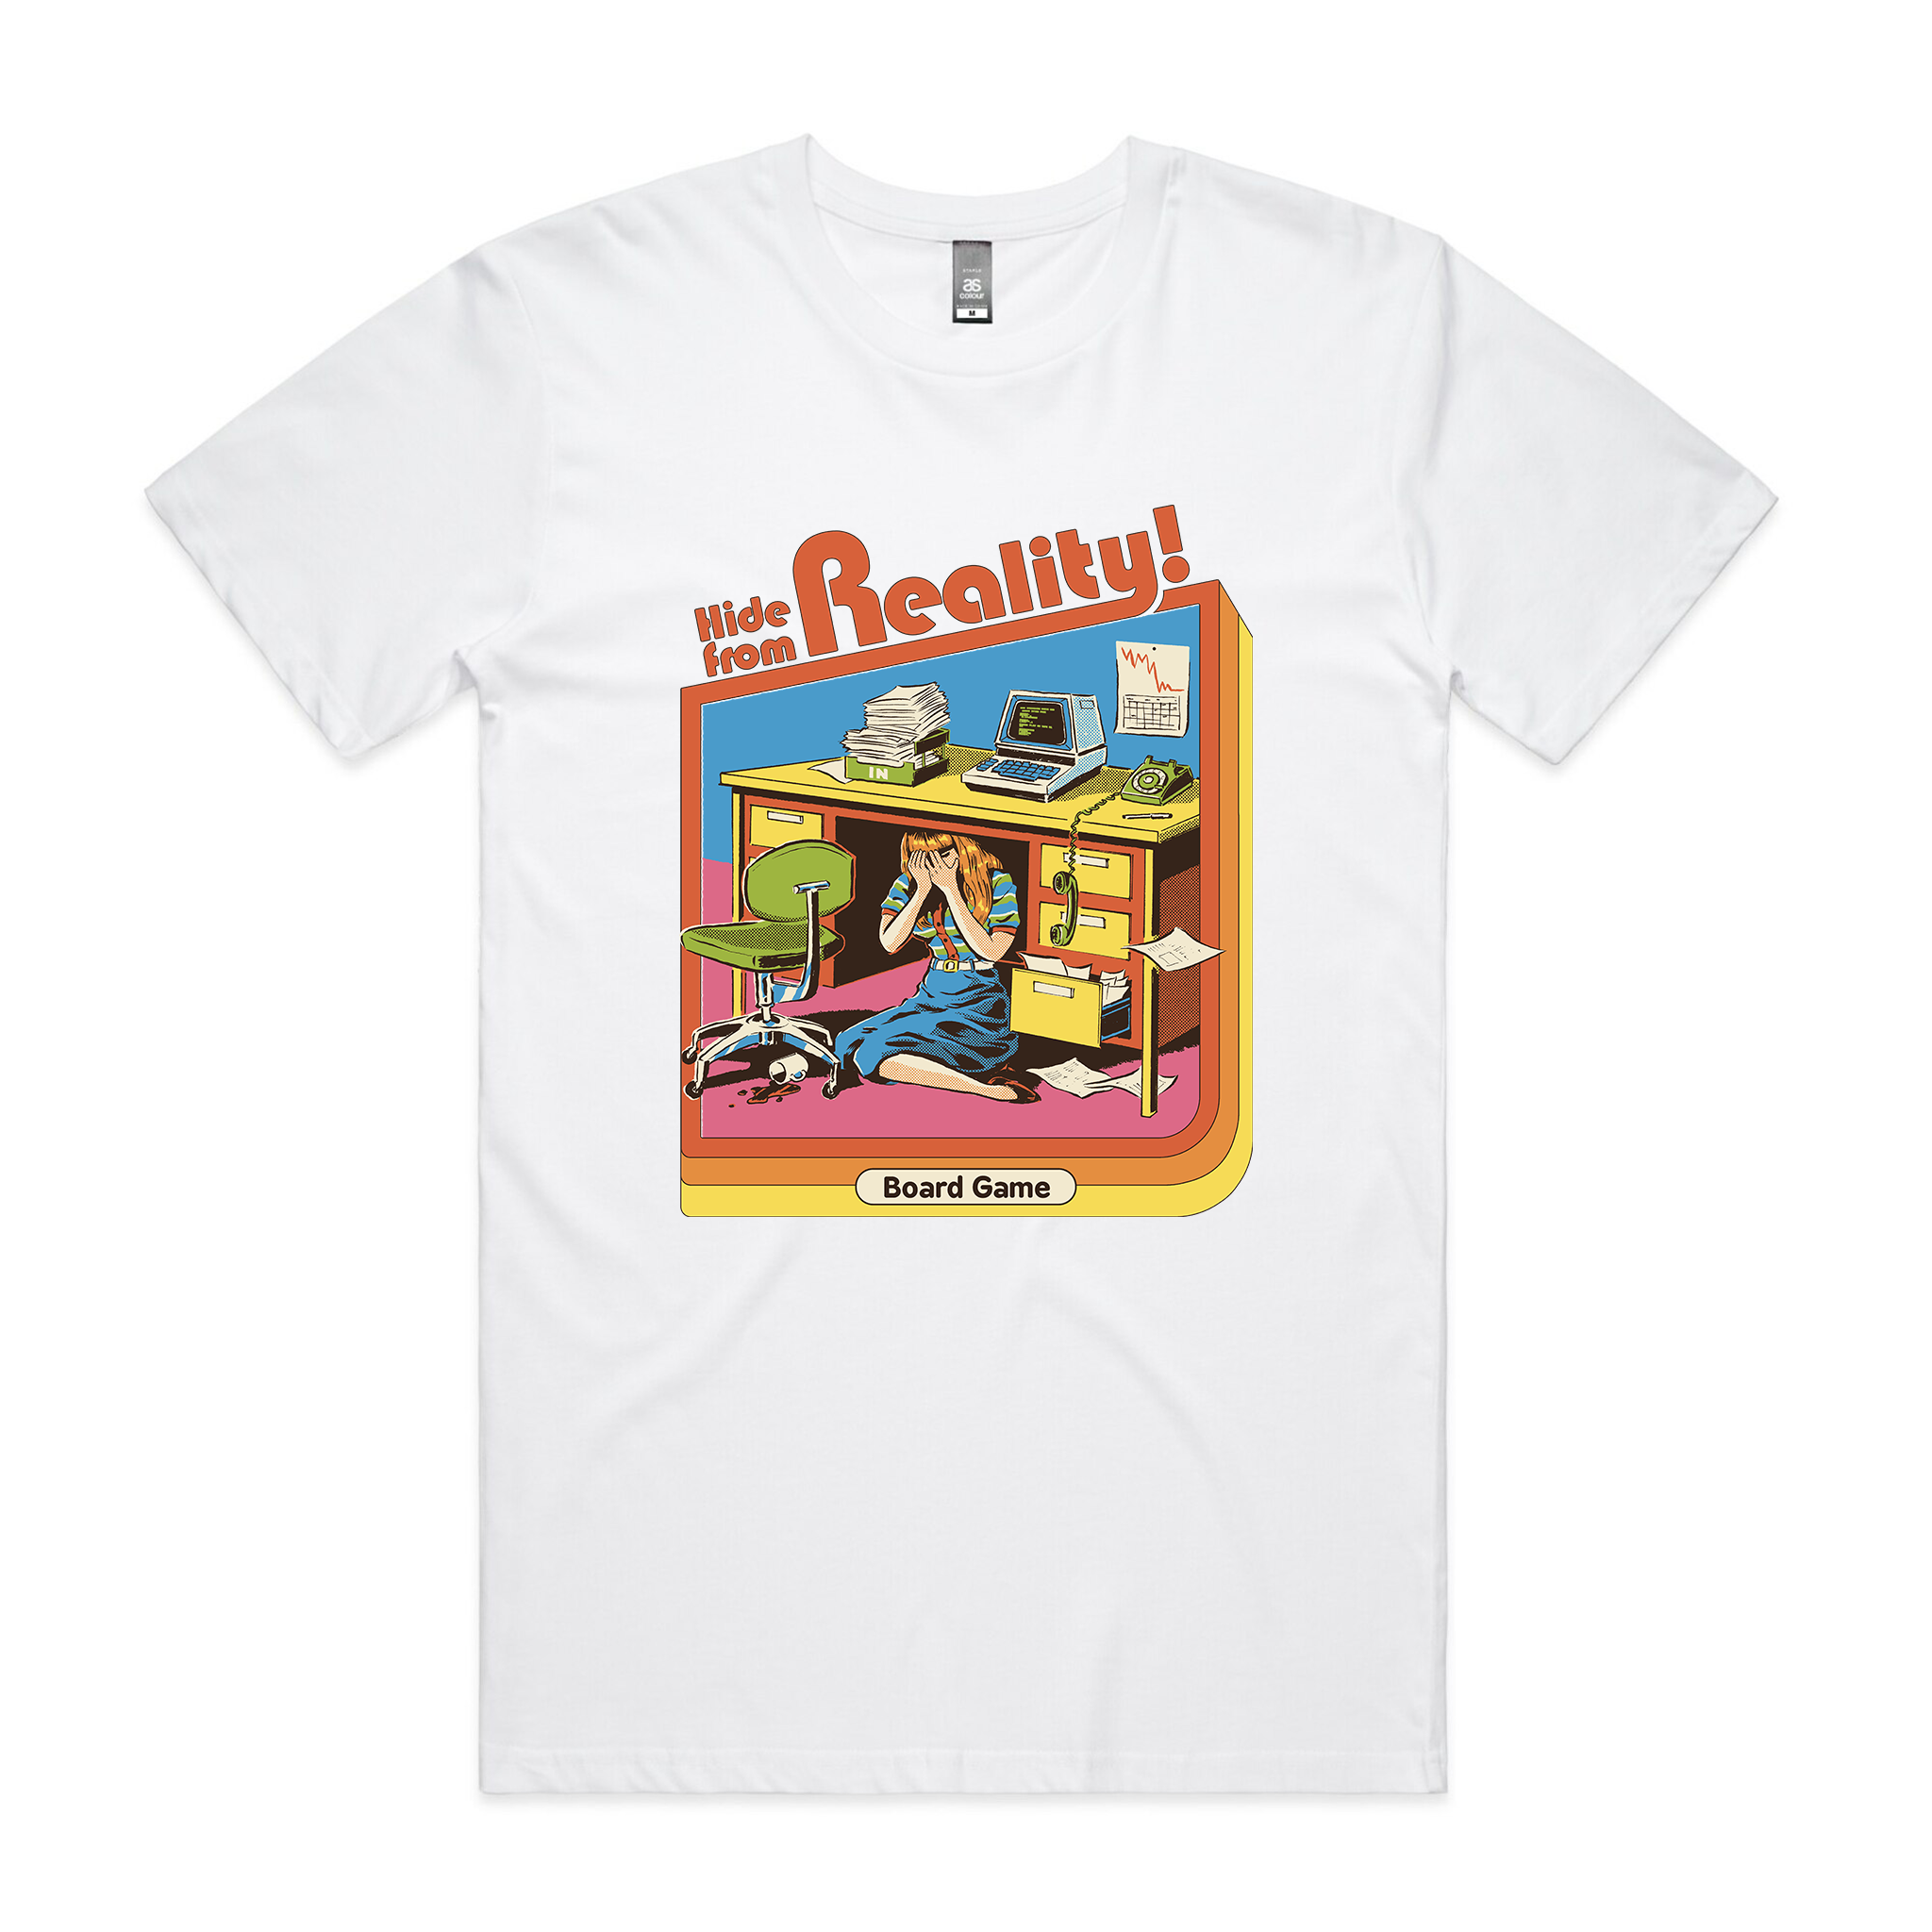 Hide From Reality Tee